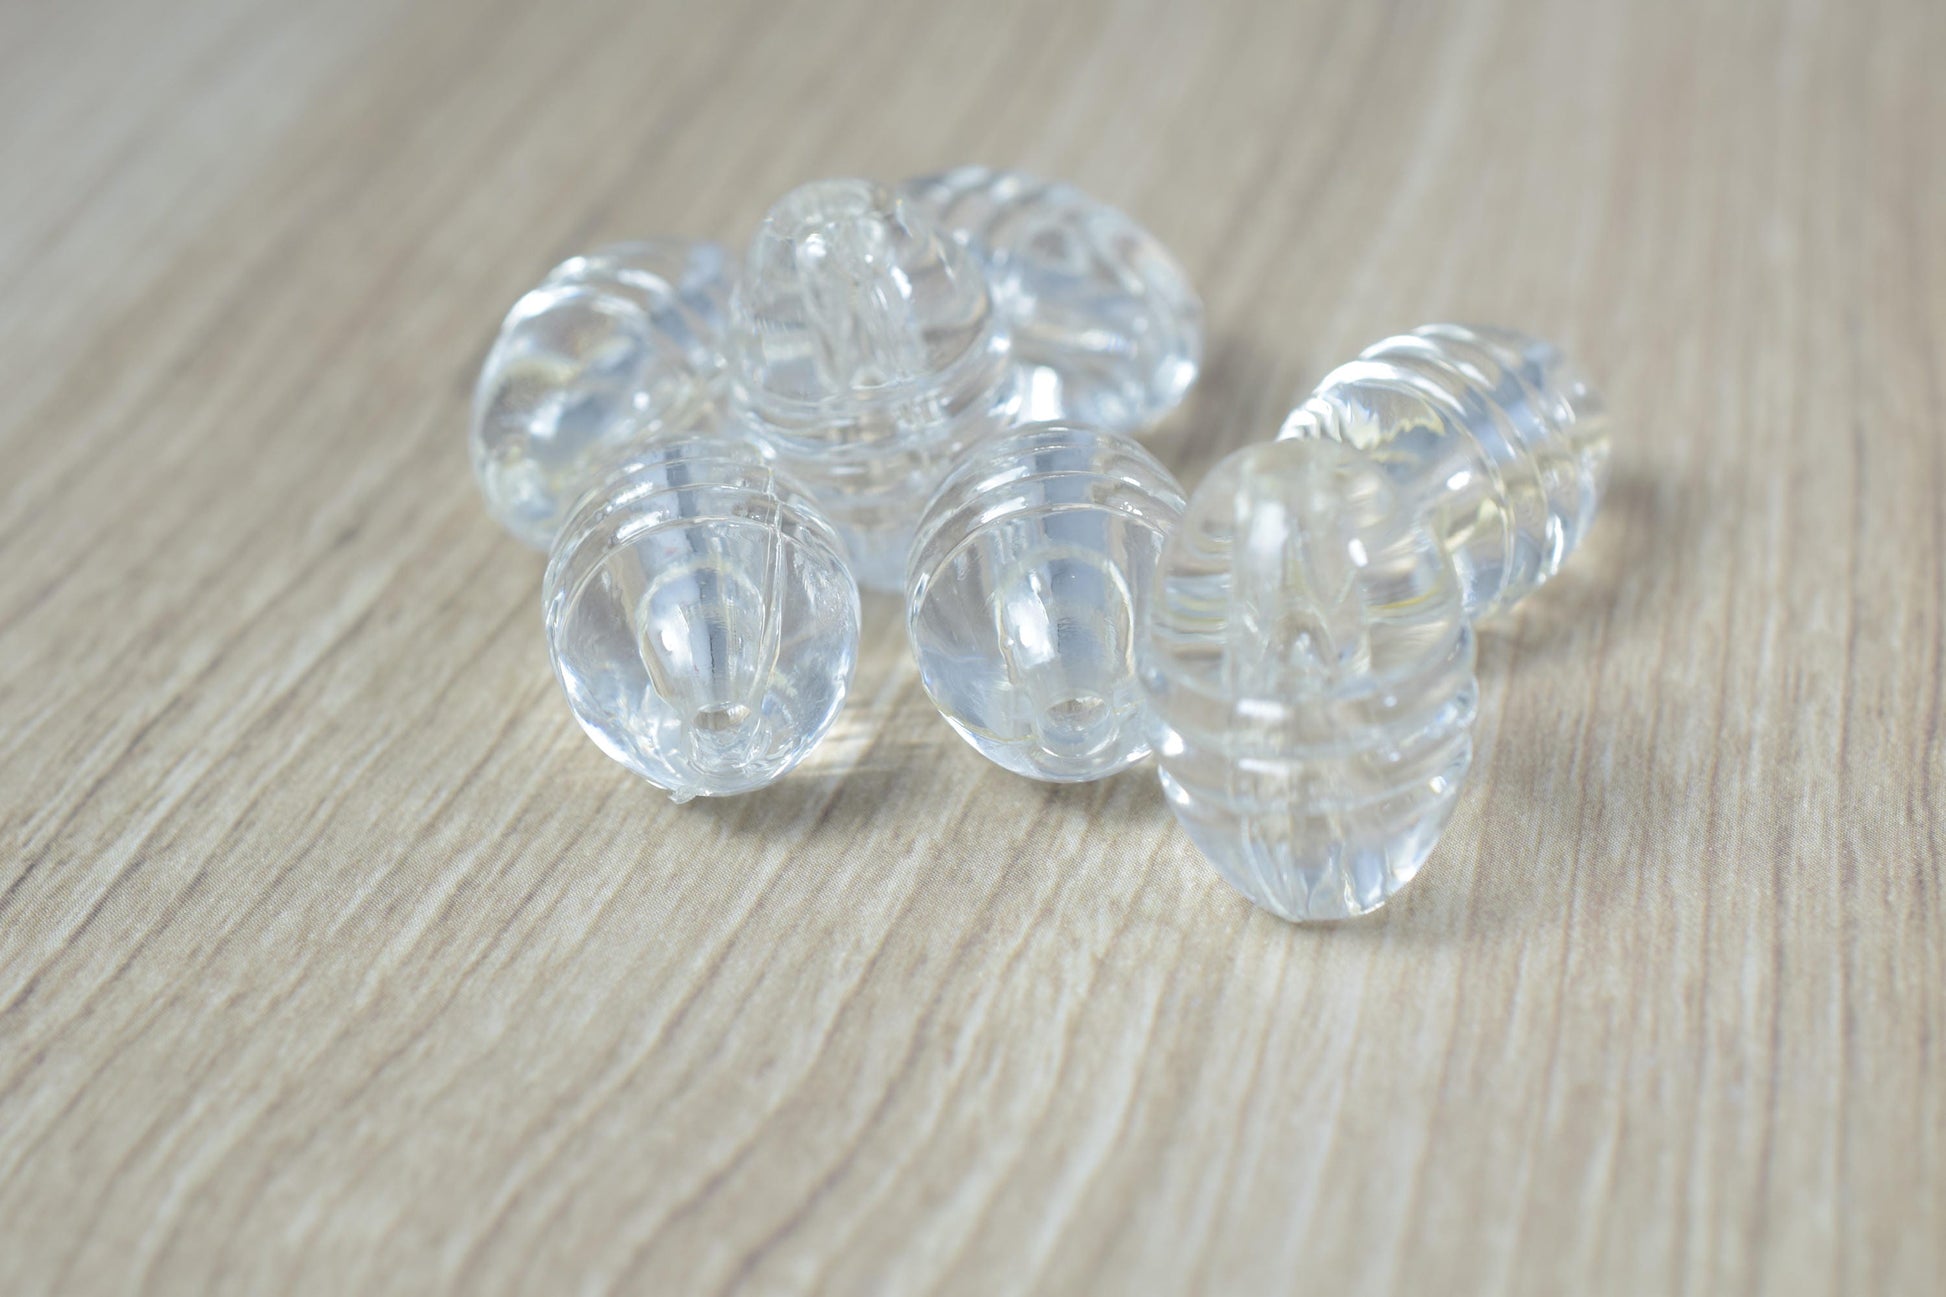 18 x 25mm Clear Ridge Lucite Plastic Beads/Vintage Barrel Plastic Clear Beads/Wholesale/Sold by 60 PCs, Clear Beads,Grooved Tube Beads,